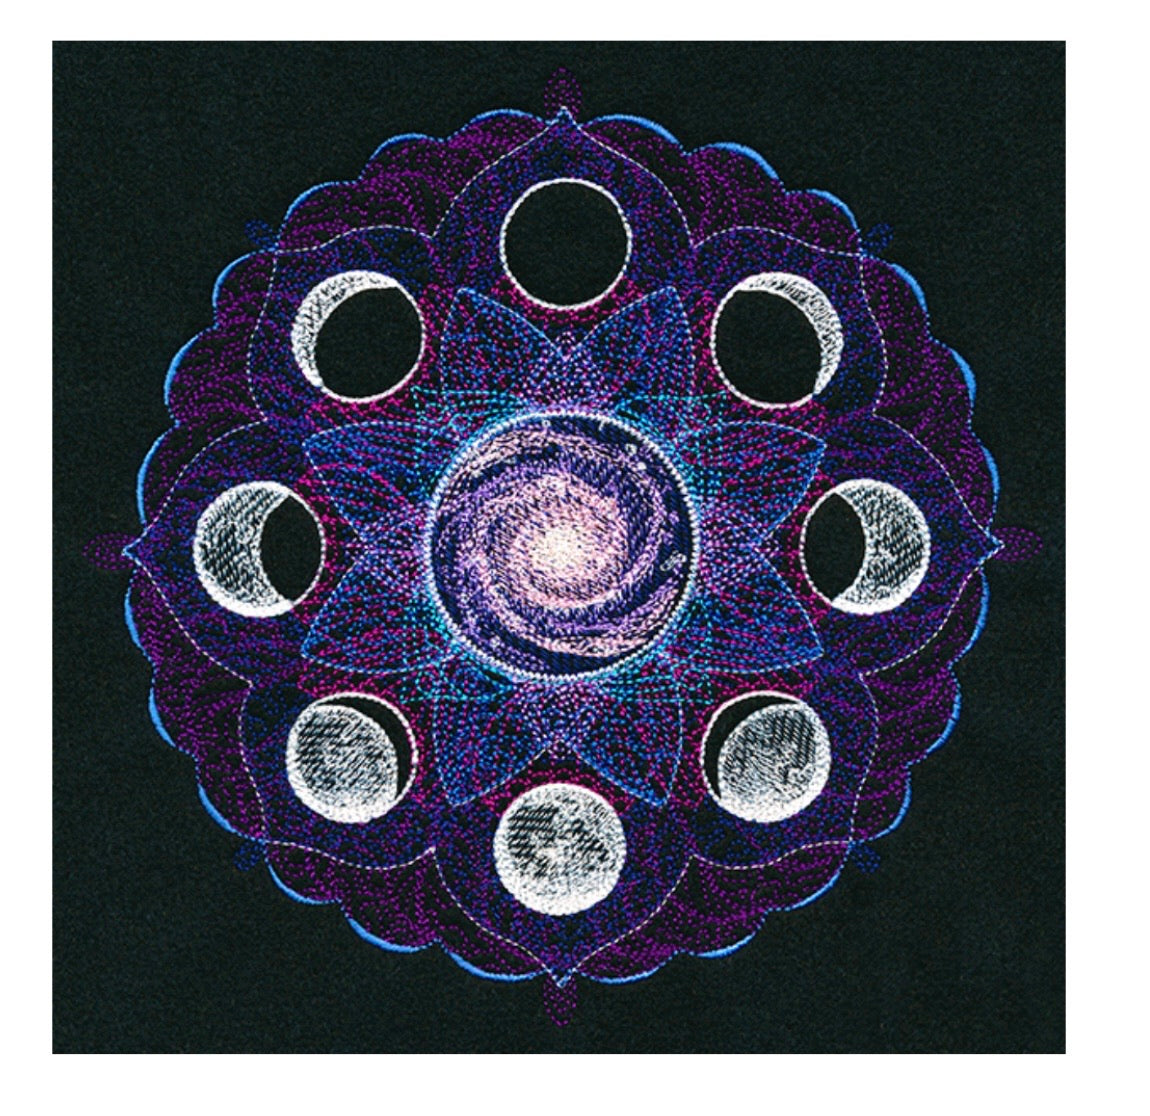 Cosmic Moon Phases Meditation Altar Cloth. Beautifully Detailed Moon Phases with Lotus Flower Mandala